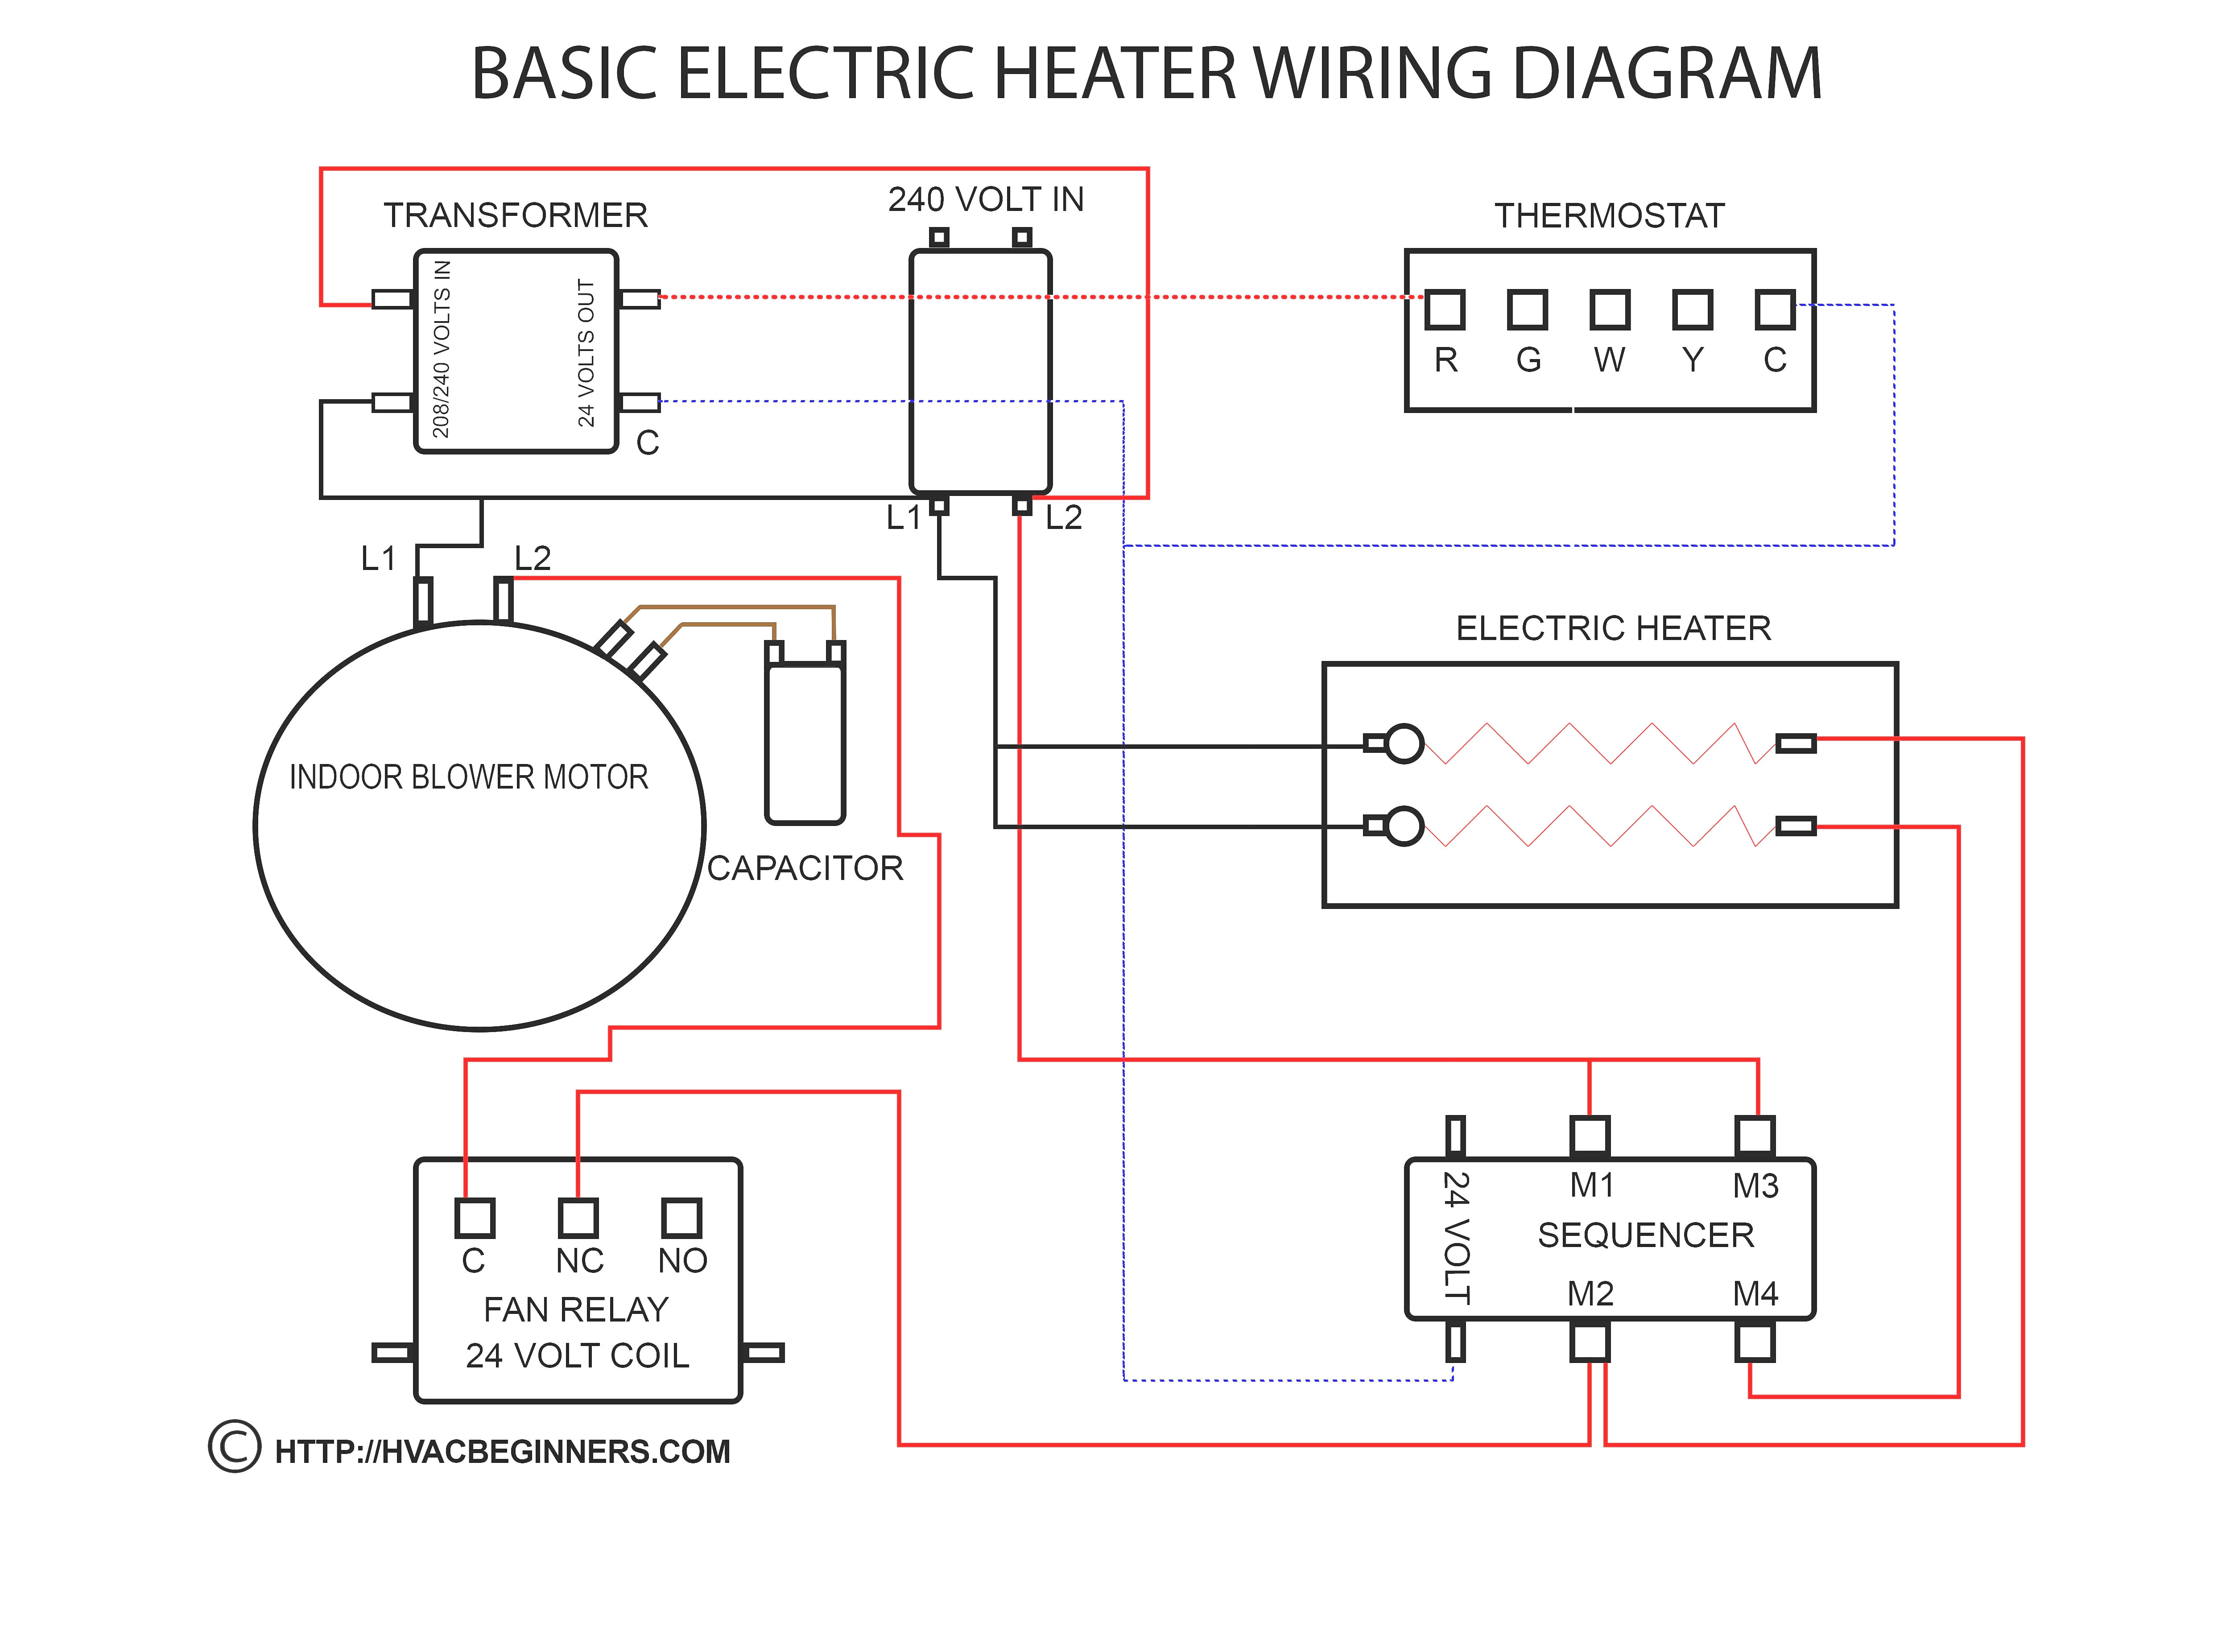 central boiler wiring diagrams wiring diagram explainedwiring diagrams for boilers manual e books boiler thermostat wiring